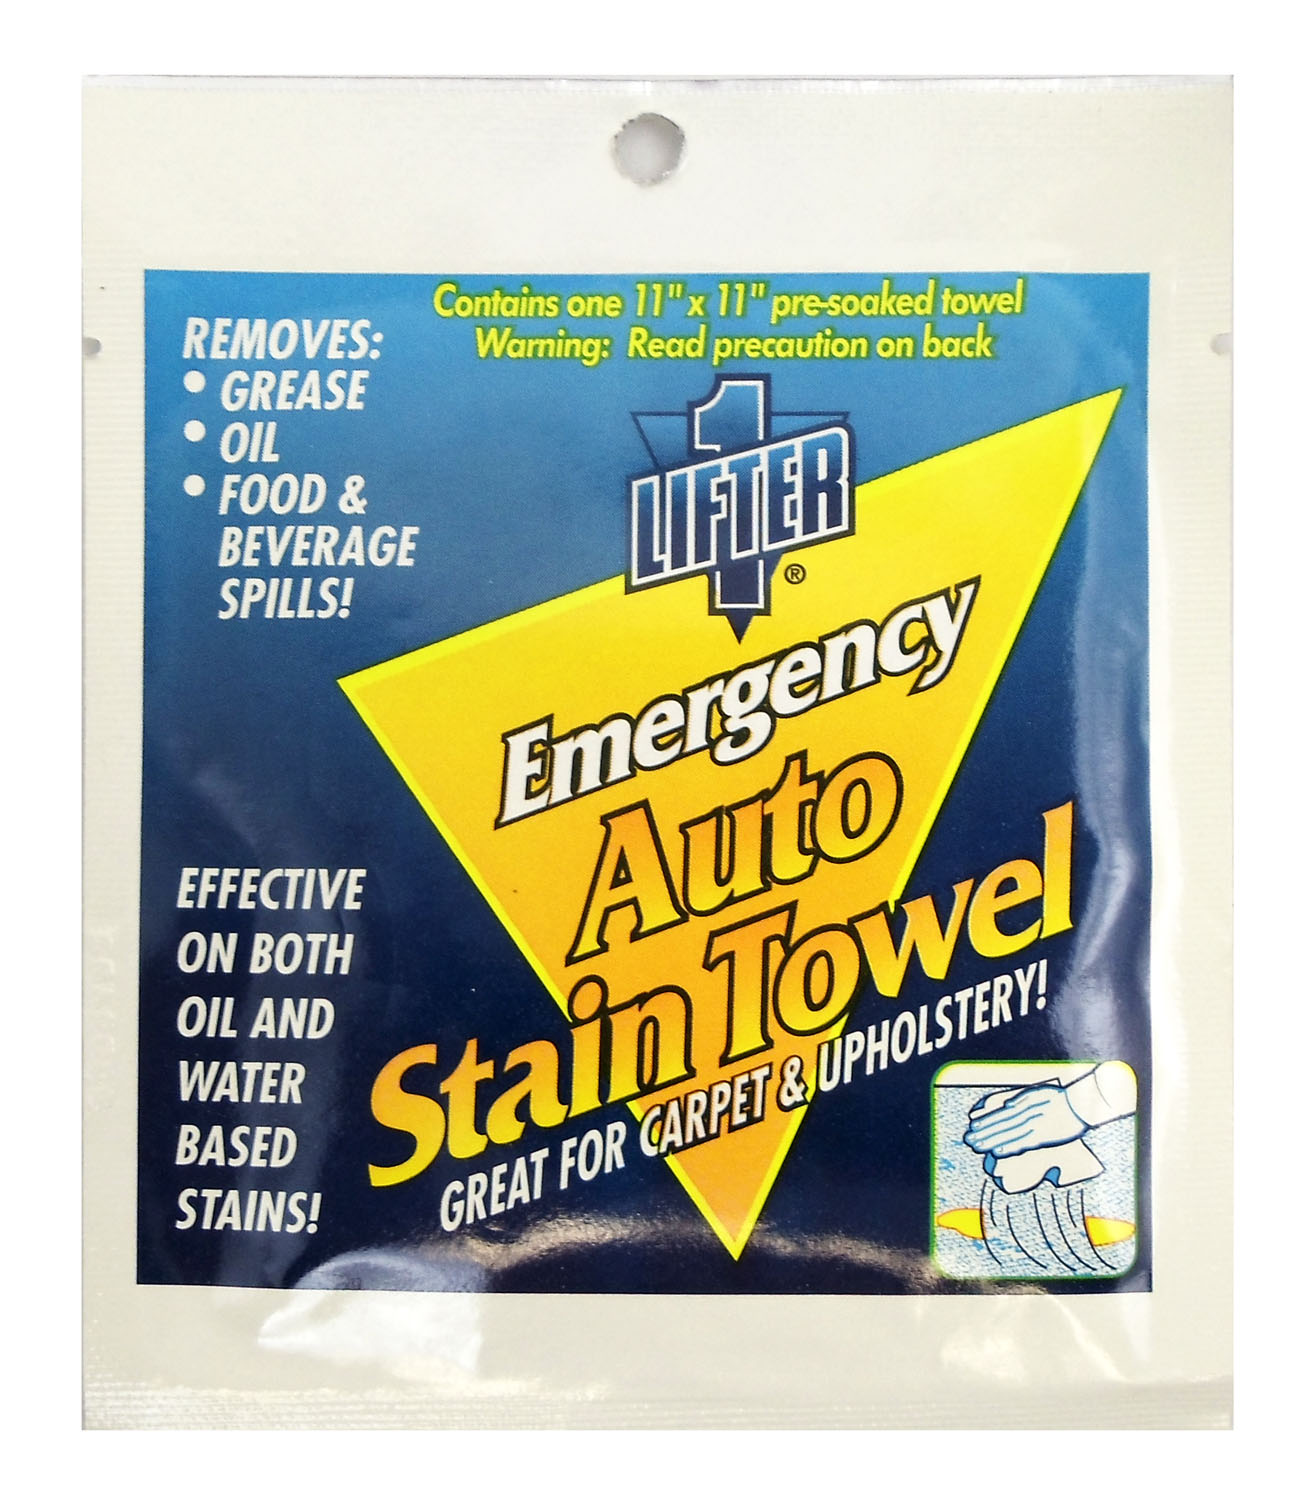 Lifter 1 - 11" X 11" Emergency Auto Stain Lifter Towelette For Grease, Oil, Food & Beverage Spills On Carpet & Upholstery